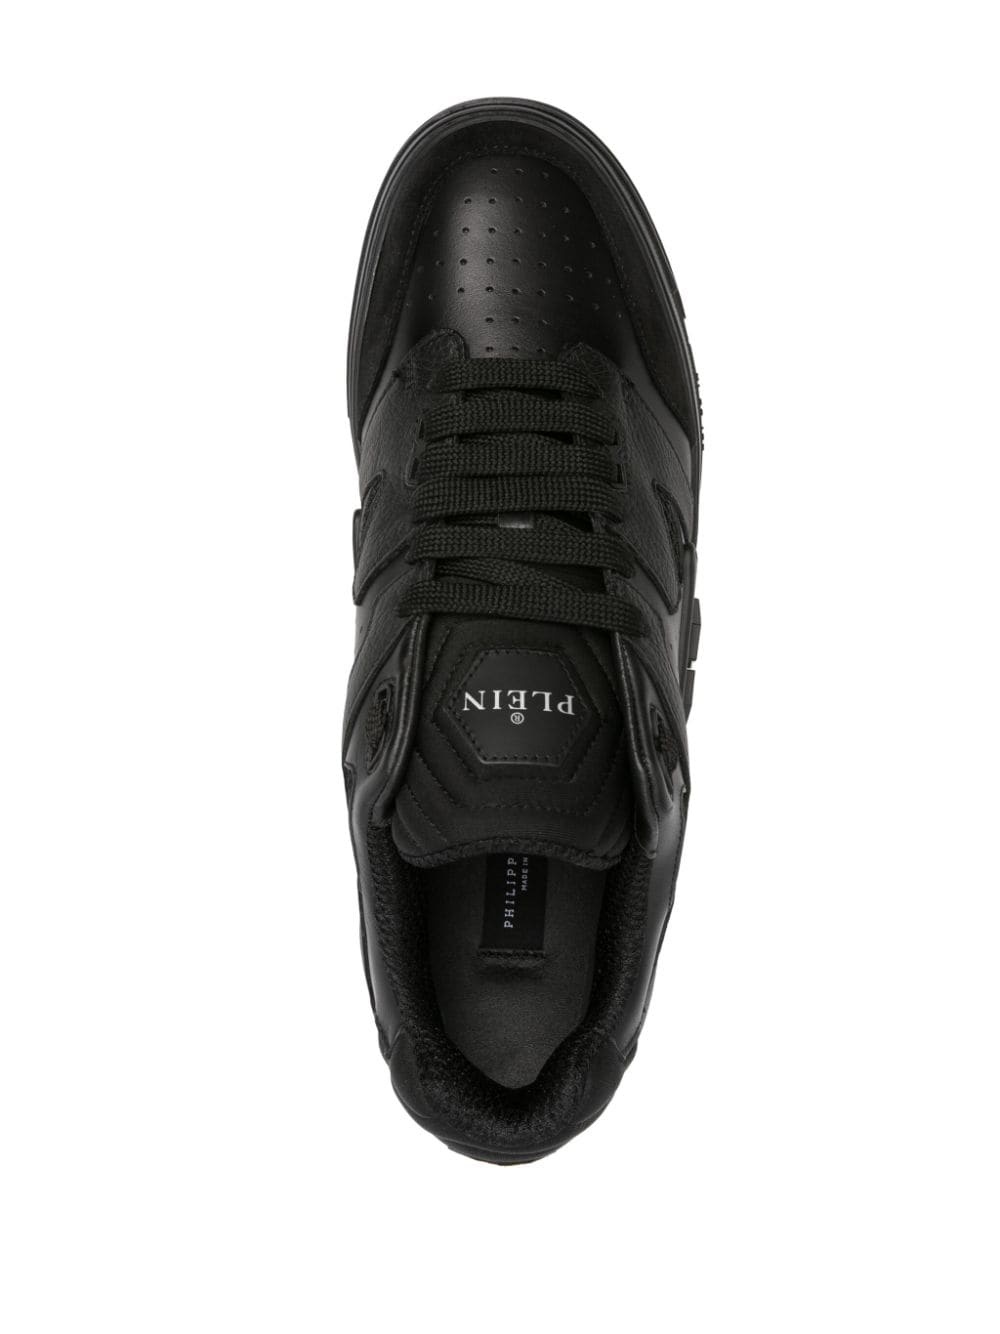 Super Street leather sneakers - 4